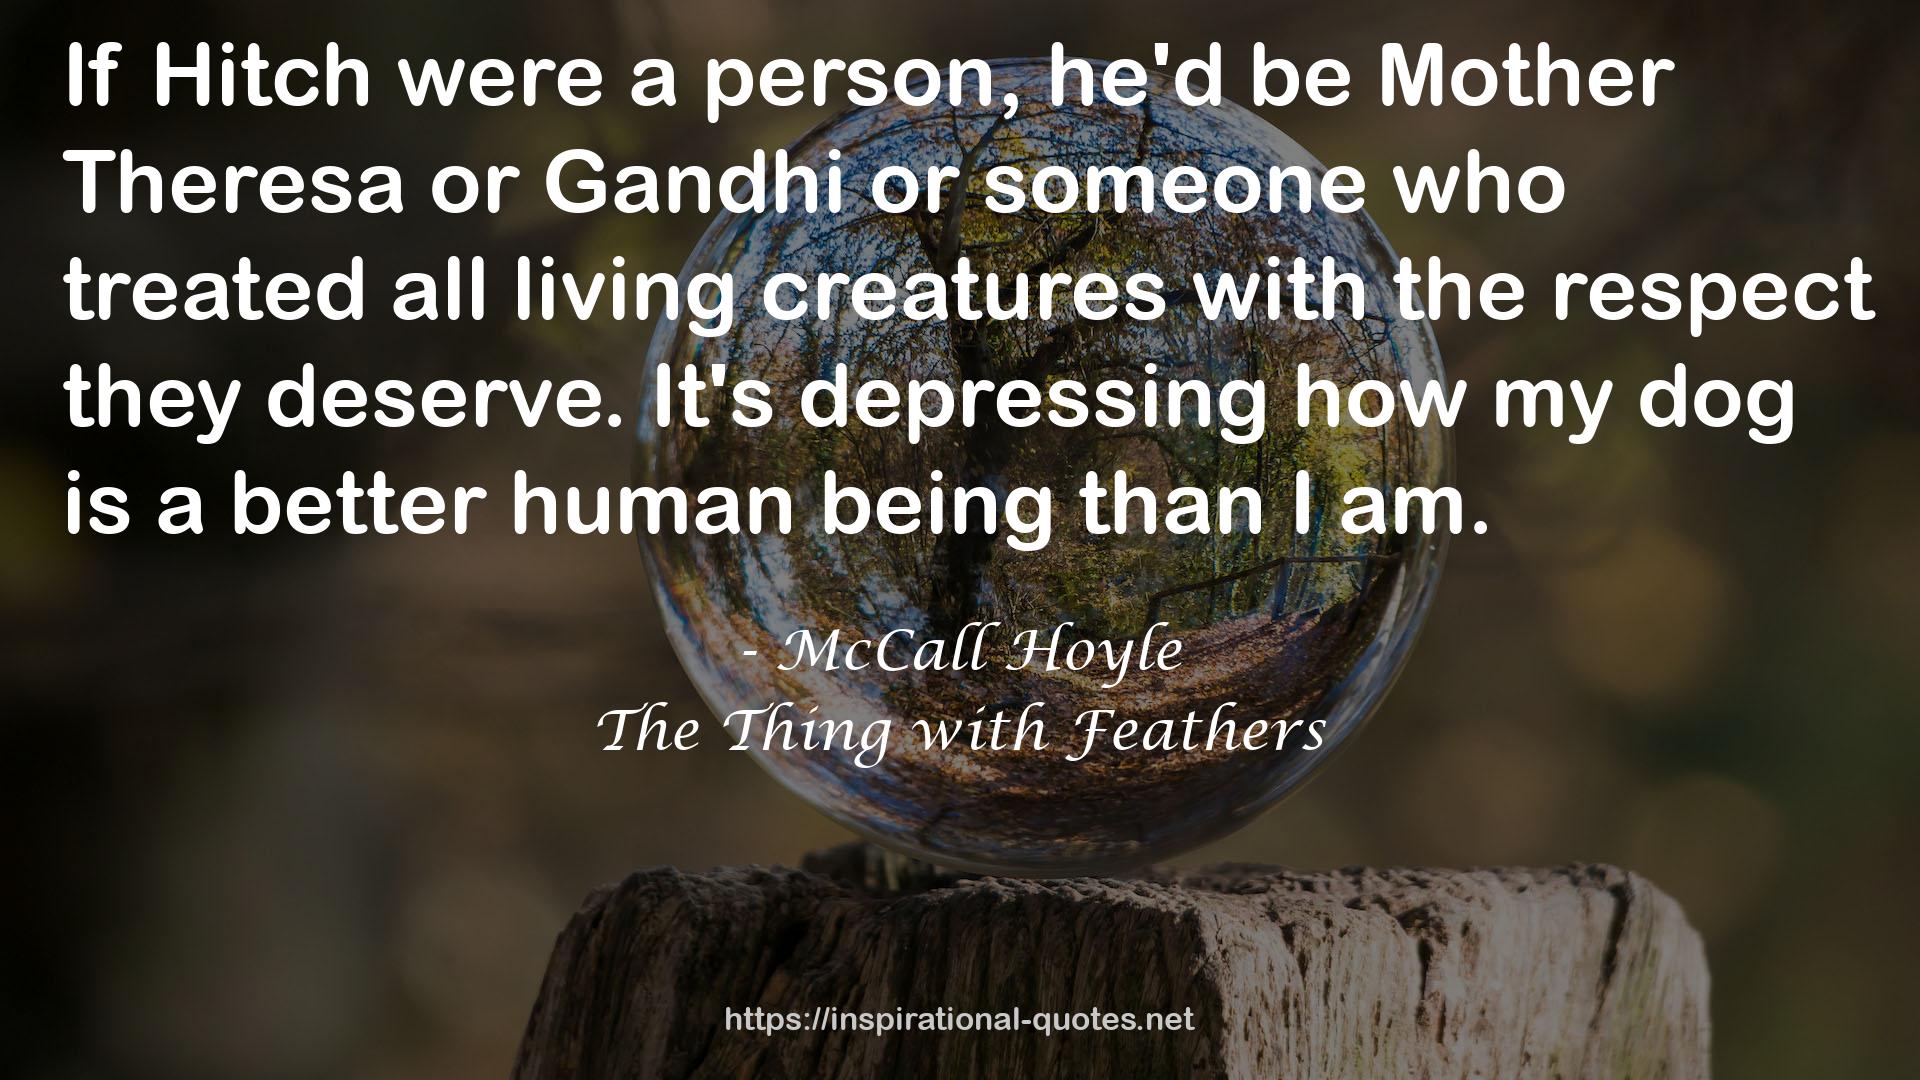 McCall Hoyle QUOTES